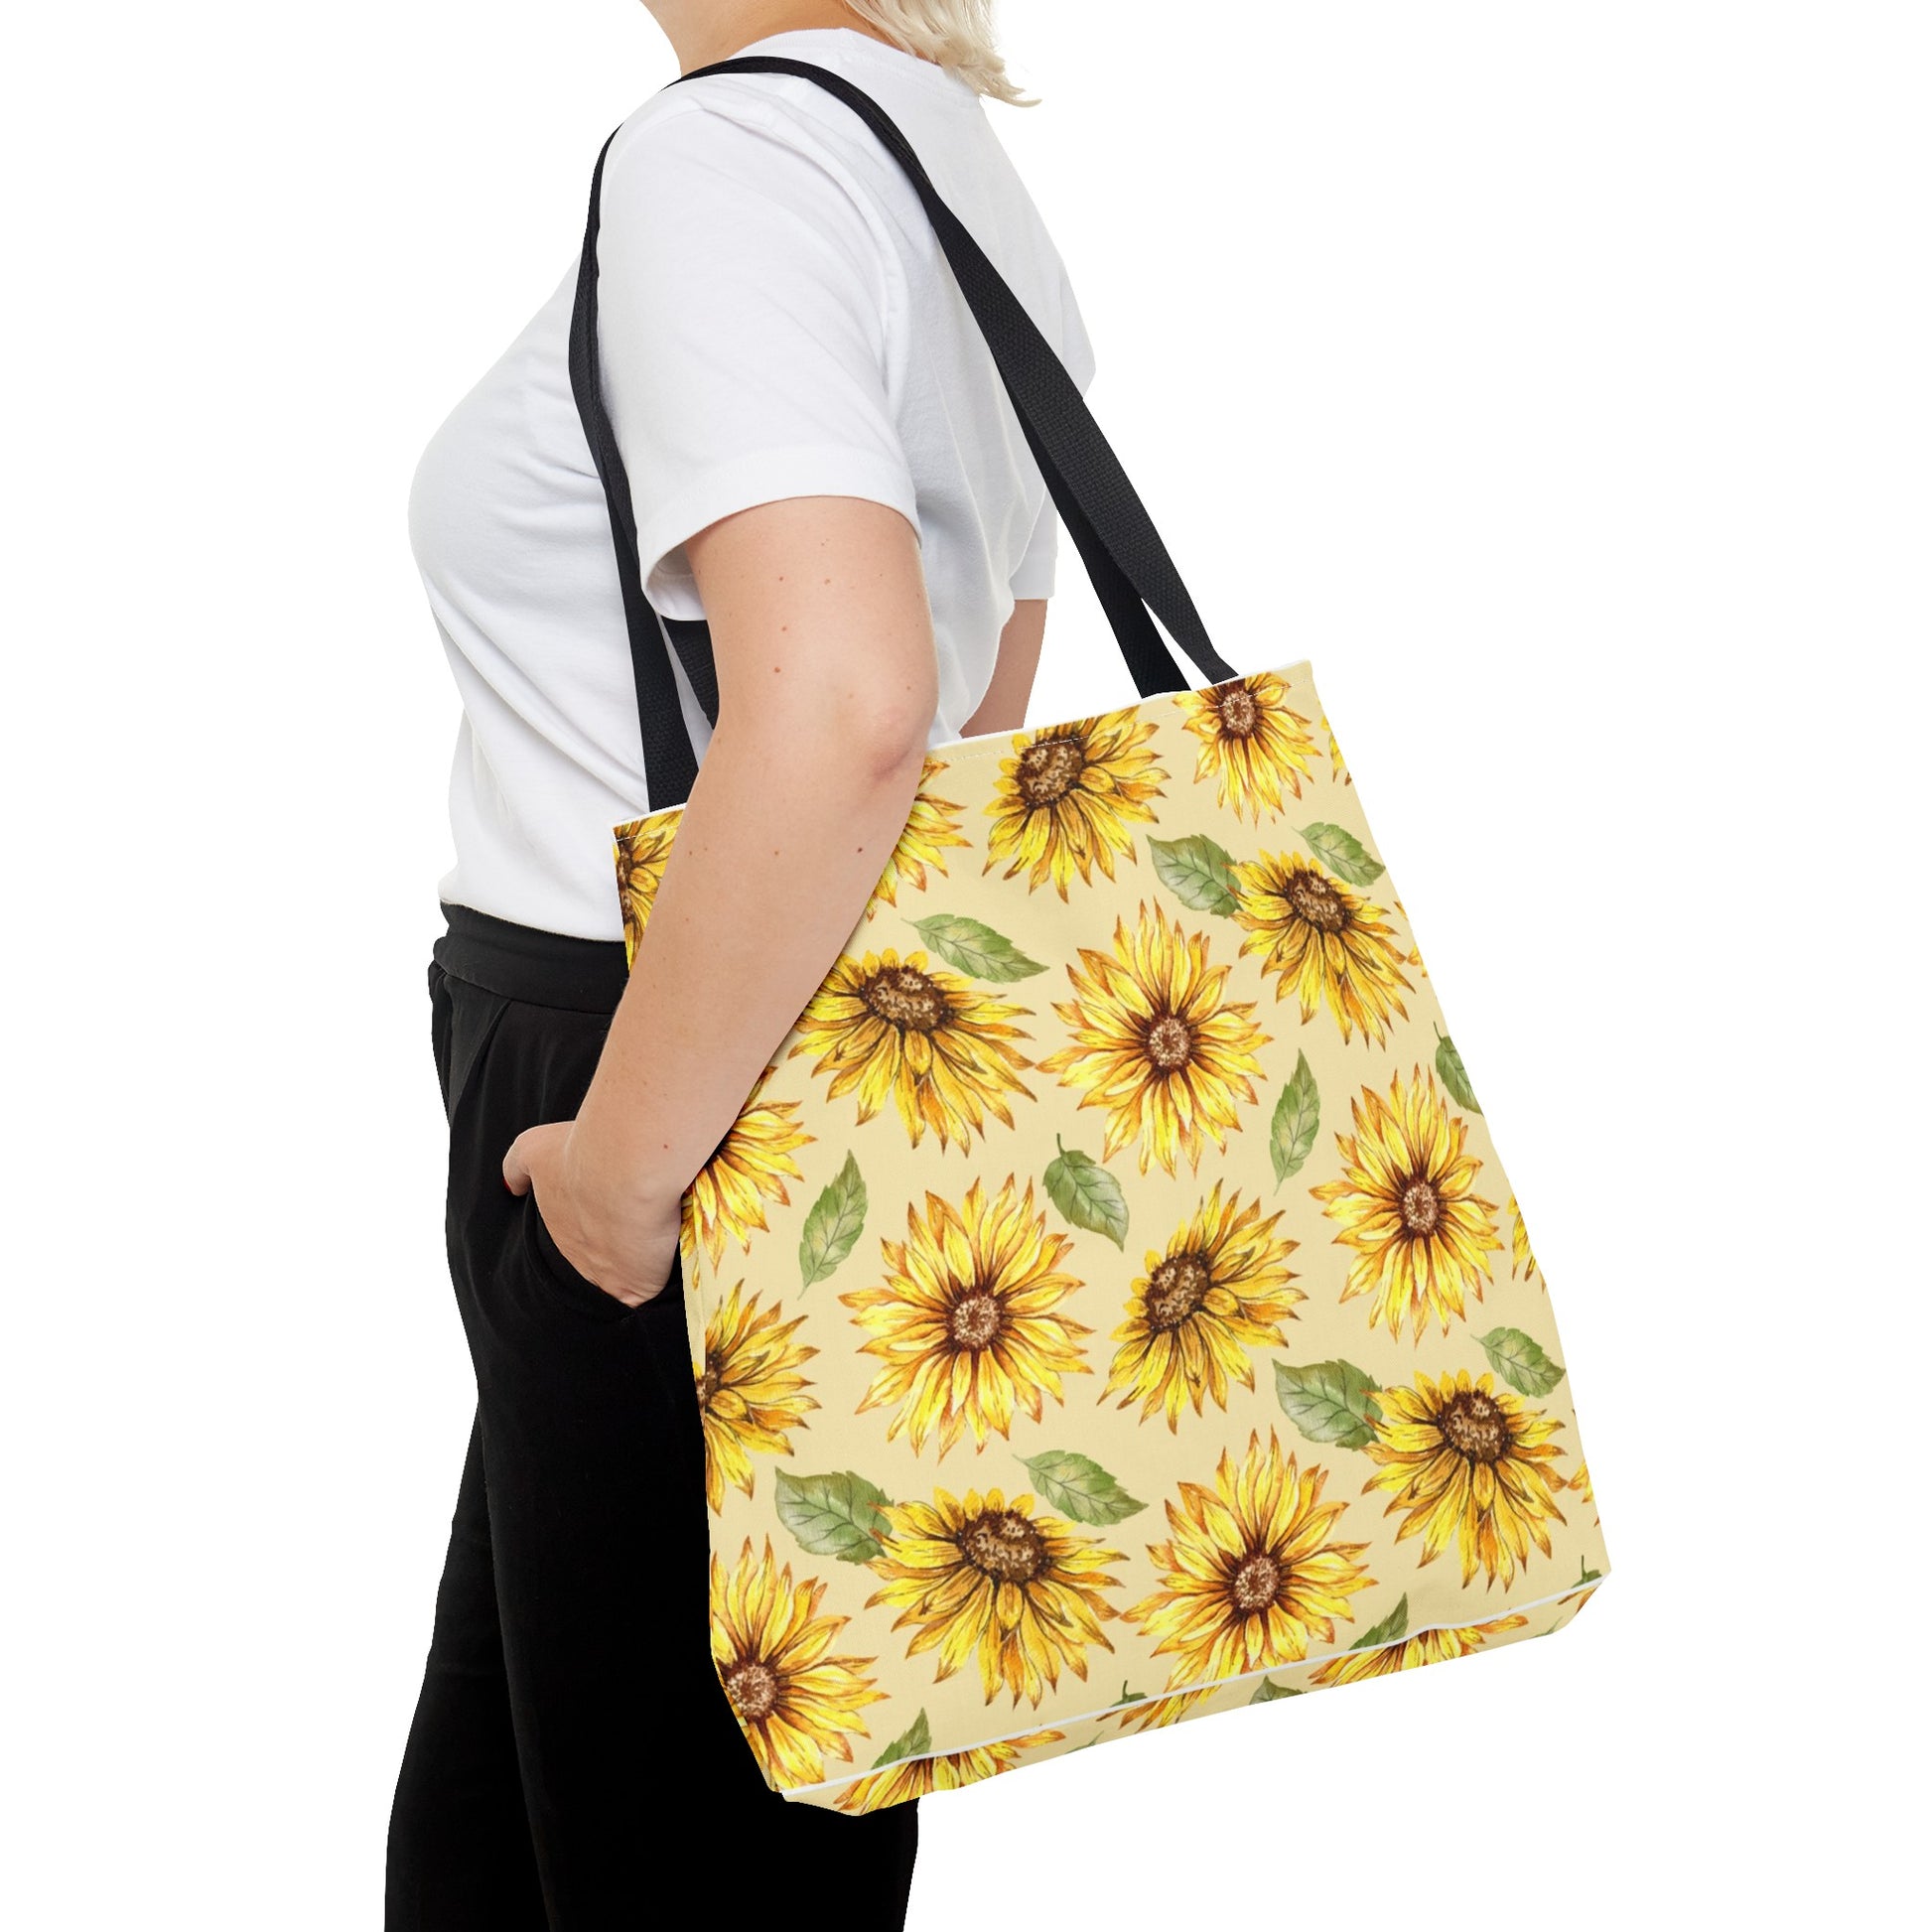 A person wearing a white t-shirt and black pants carries a large Yellow Floral Tote Bag with sunflower print from Printify.